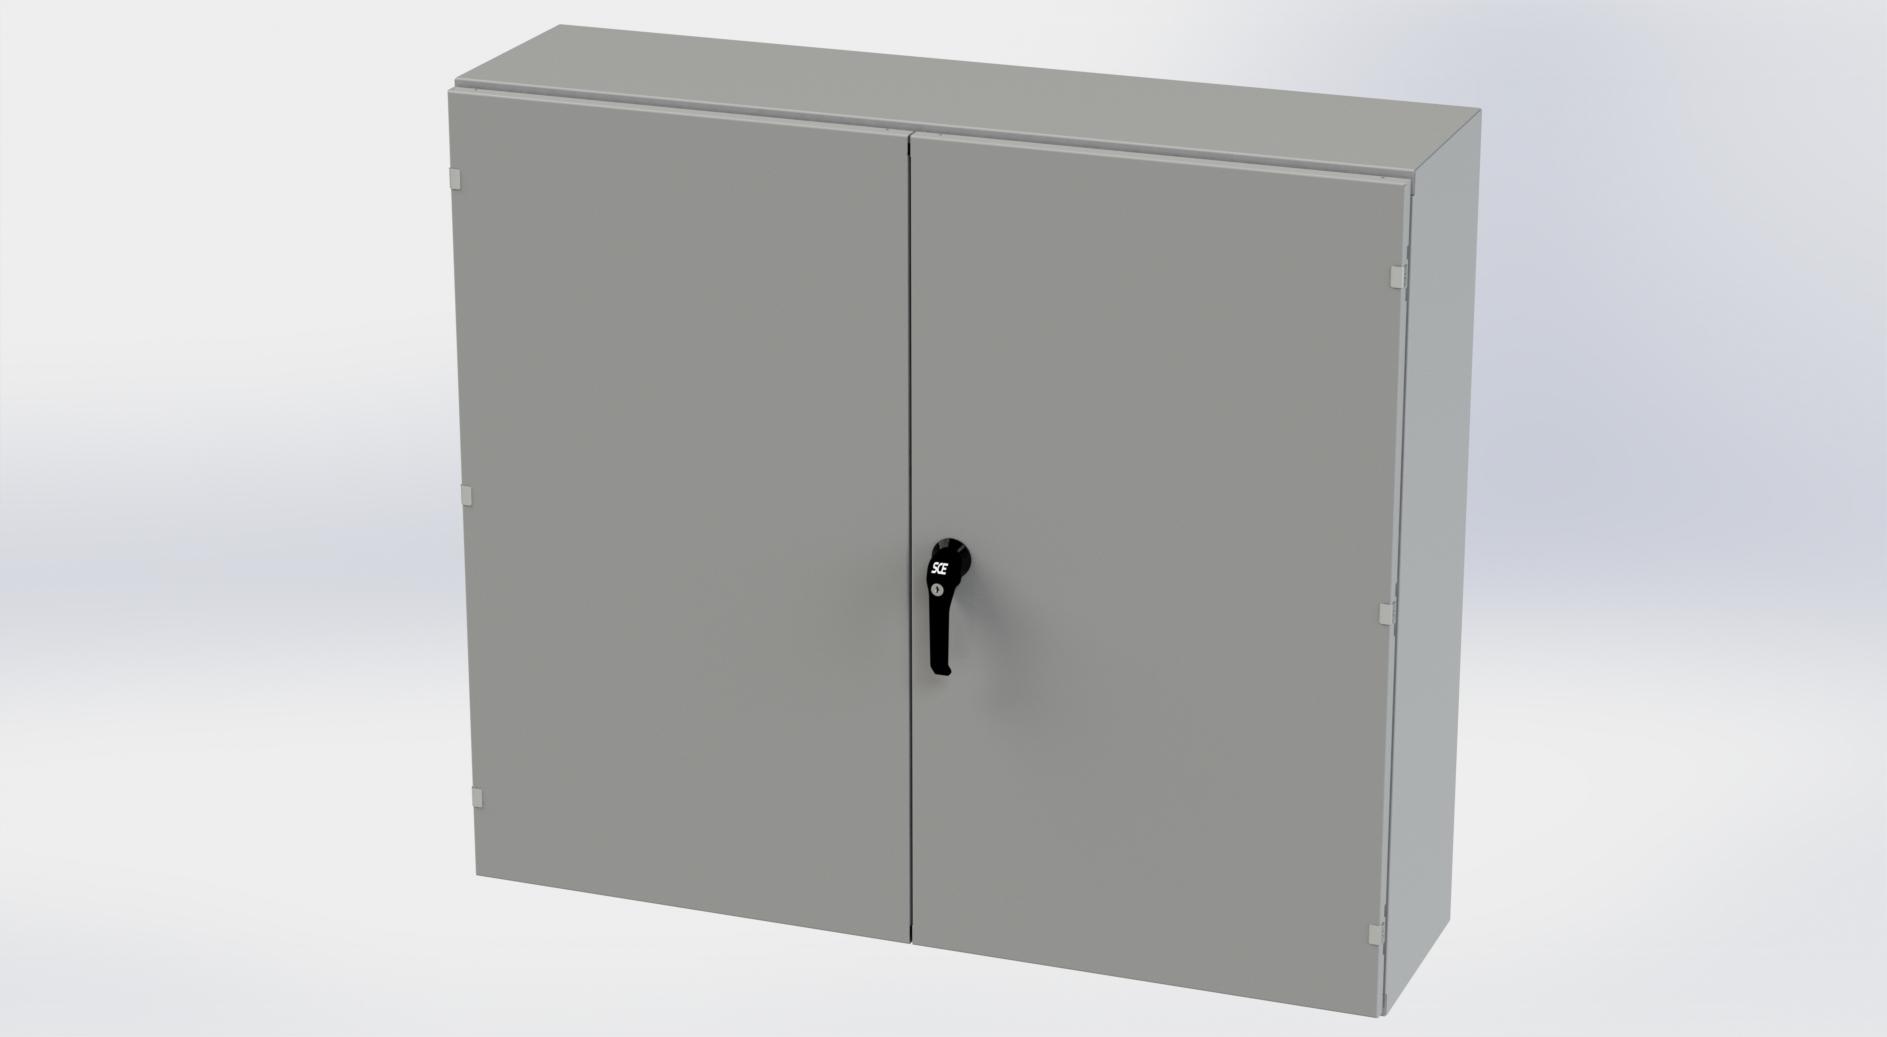 Saginaw Control SCE-424812WFLP WFLP Enclosure, Height:42.00", Width:48.00", Depth:12.00", ANSI-61 gray powder coating inside and out.